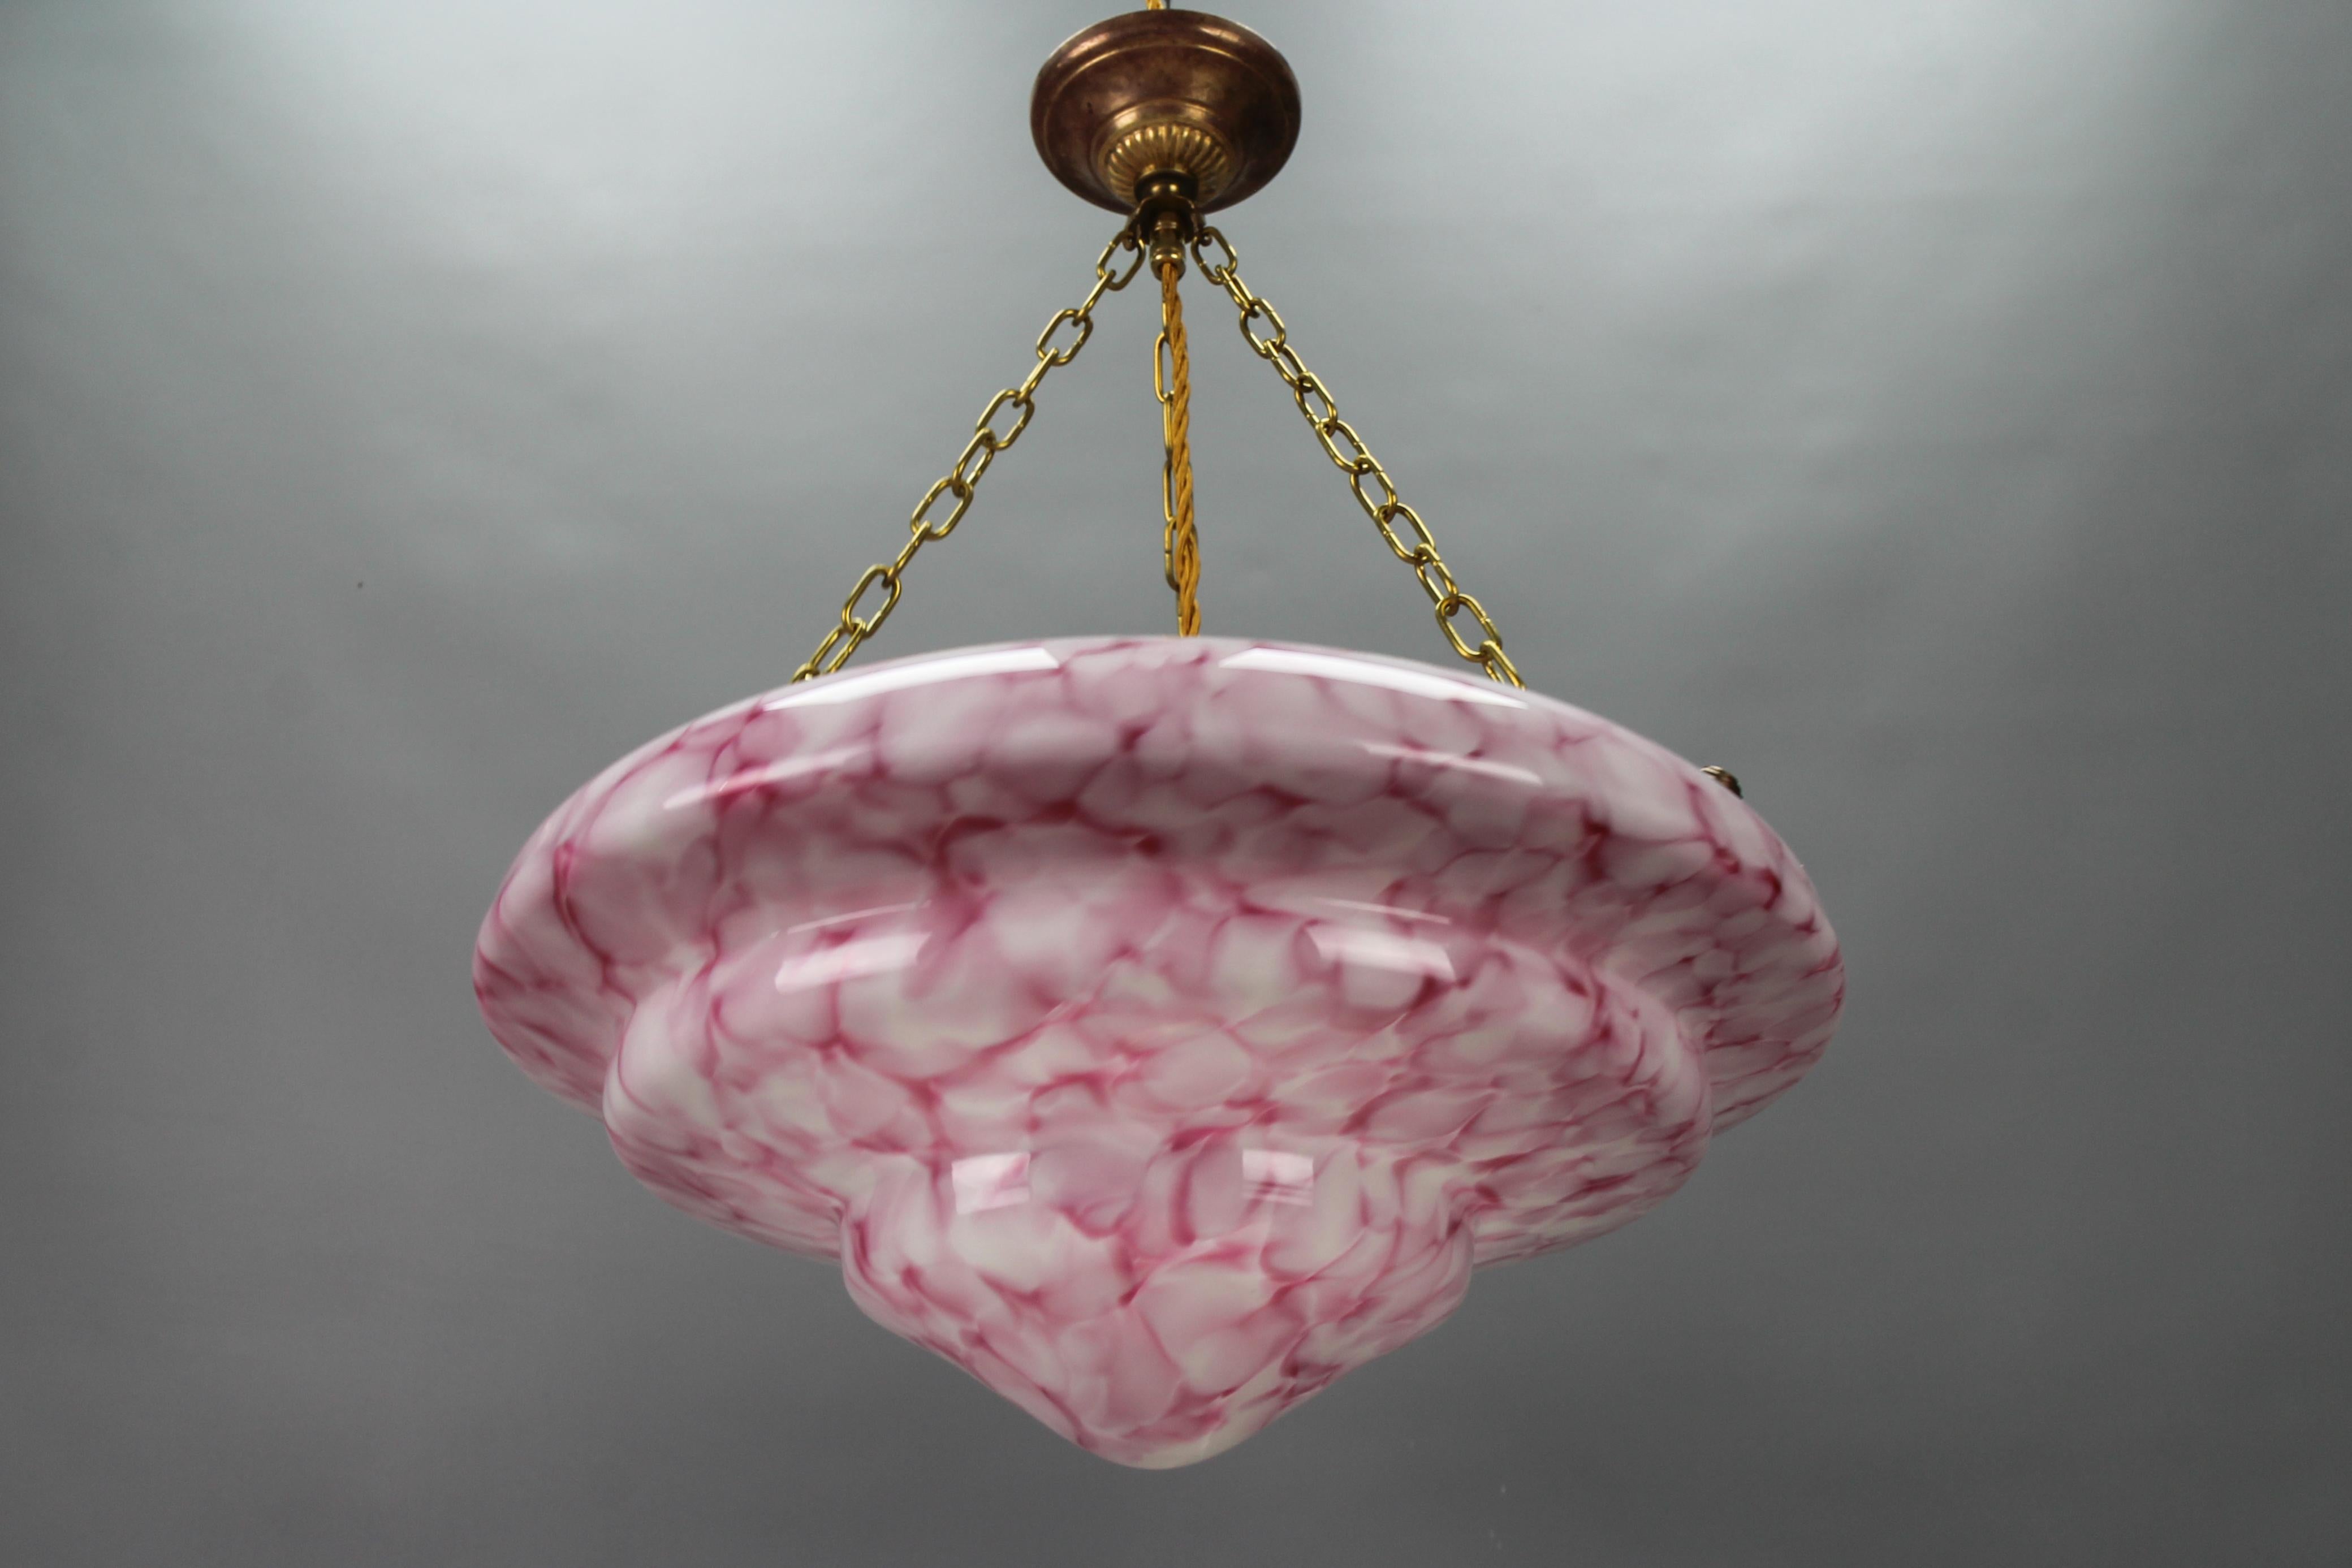 An Art Deco style marbled layered pink and white color glass and brass pendant light from circa the 1950s, Germany.
This beautiful ceiling light fixture features a marbled and layered glass lampshade in pink and white. The glass bowl is hung on